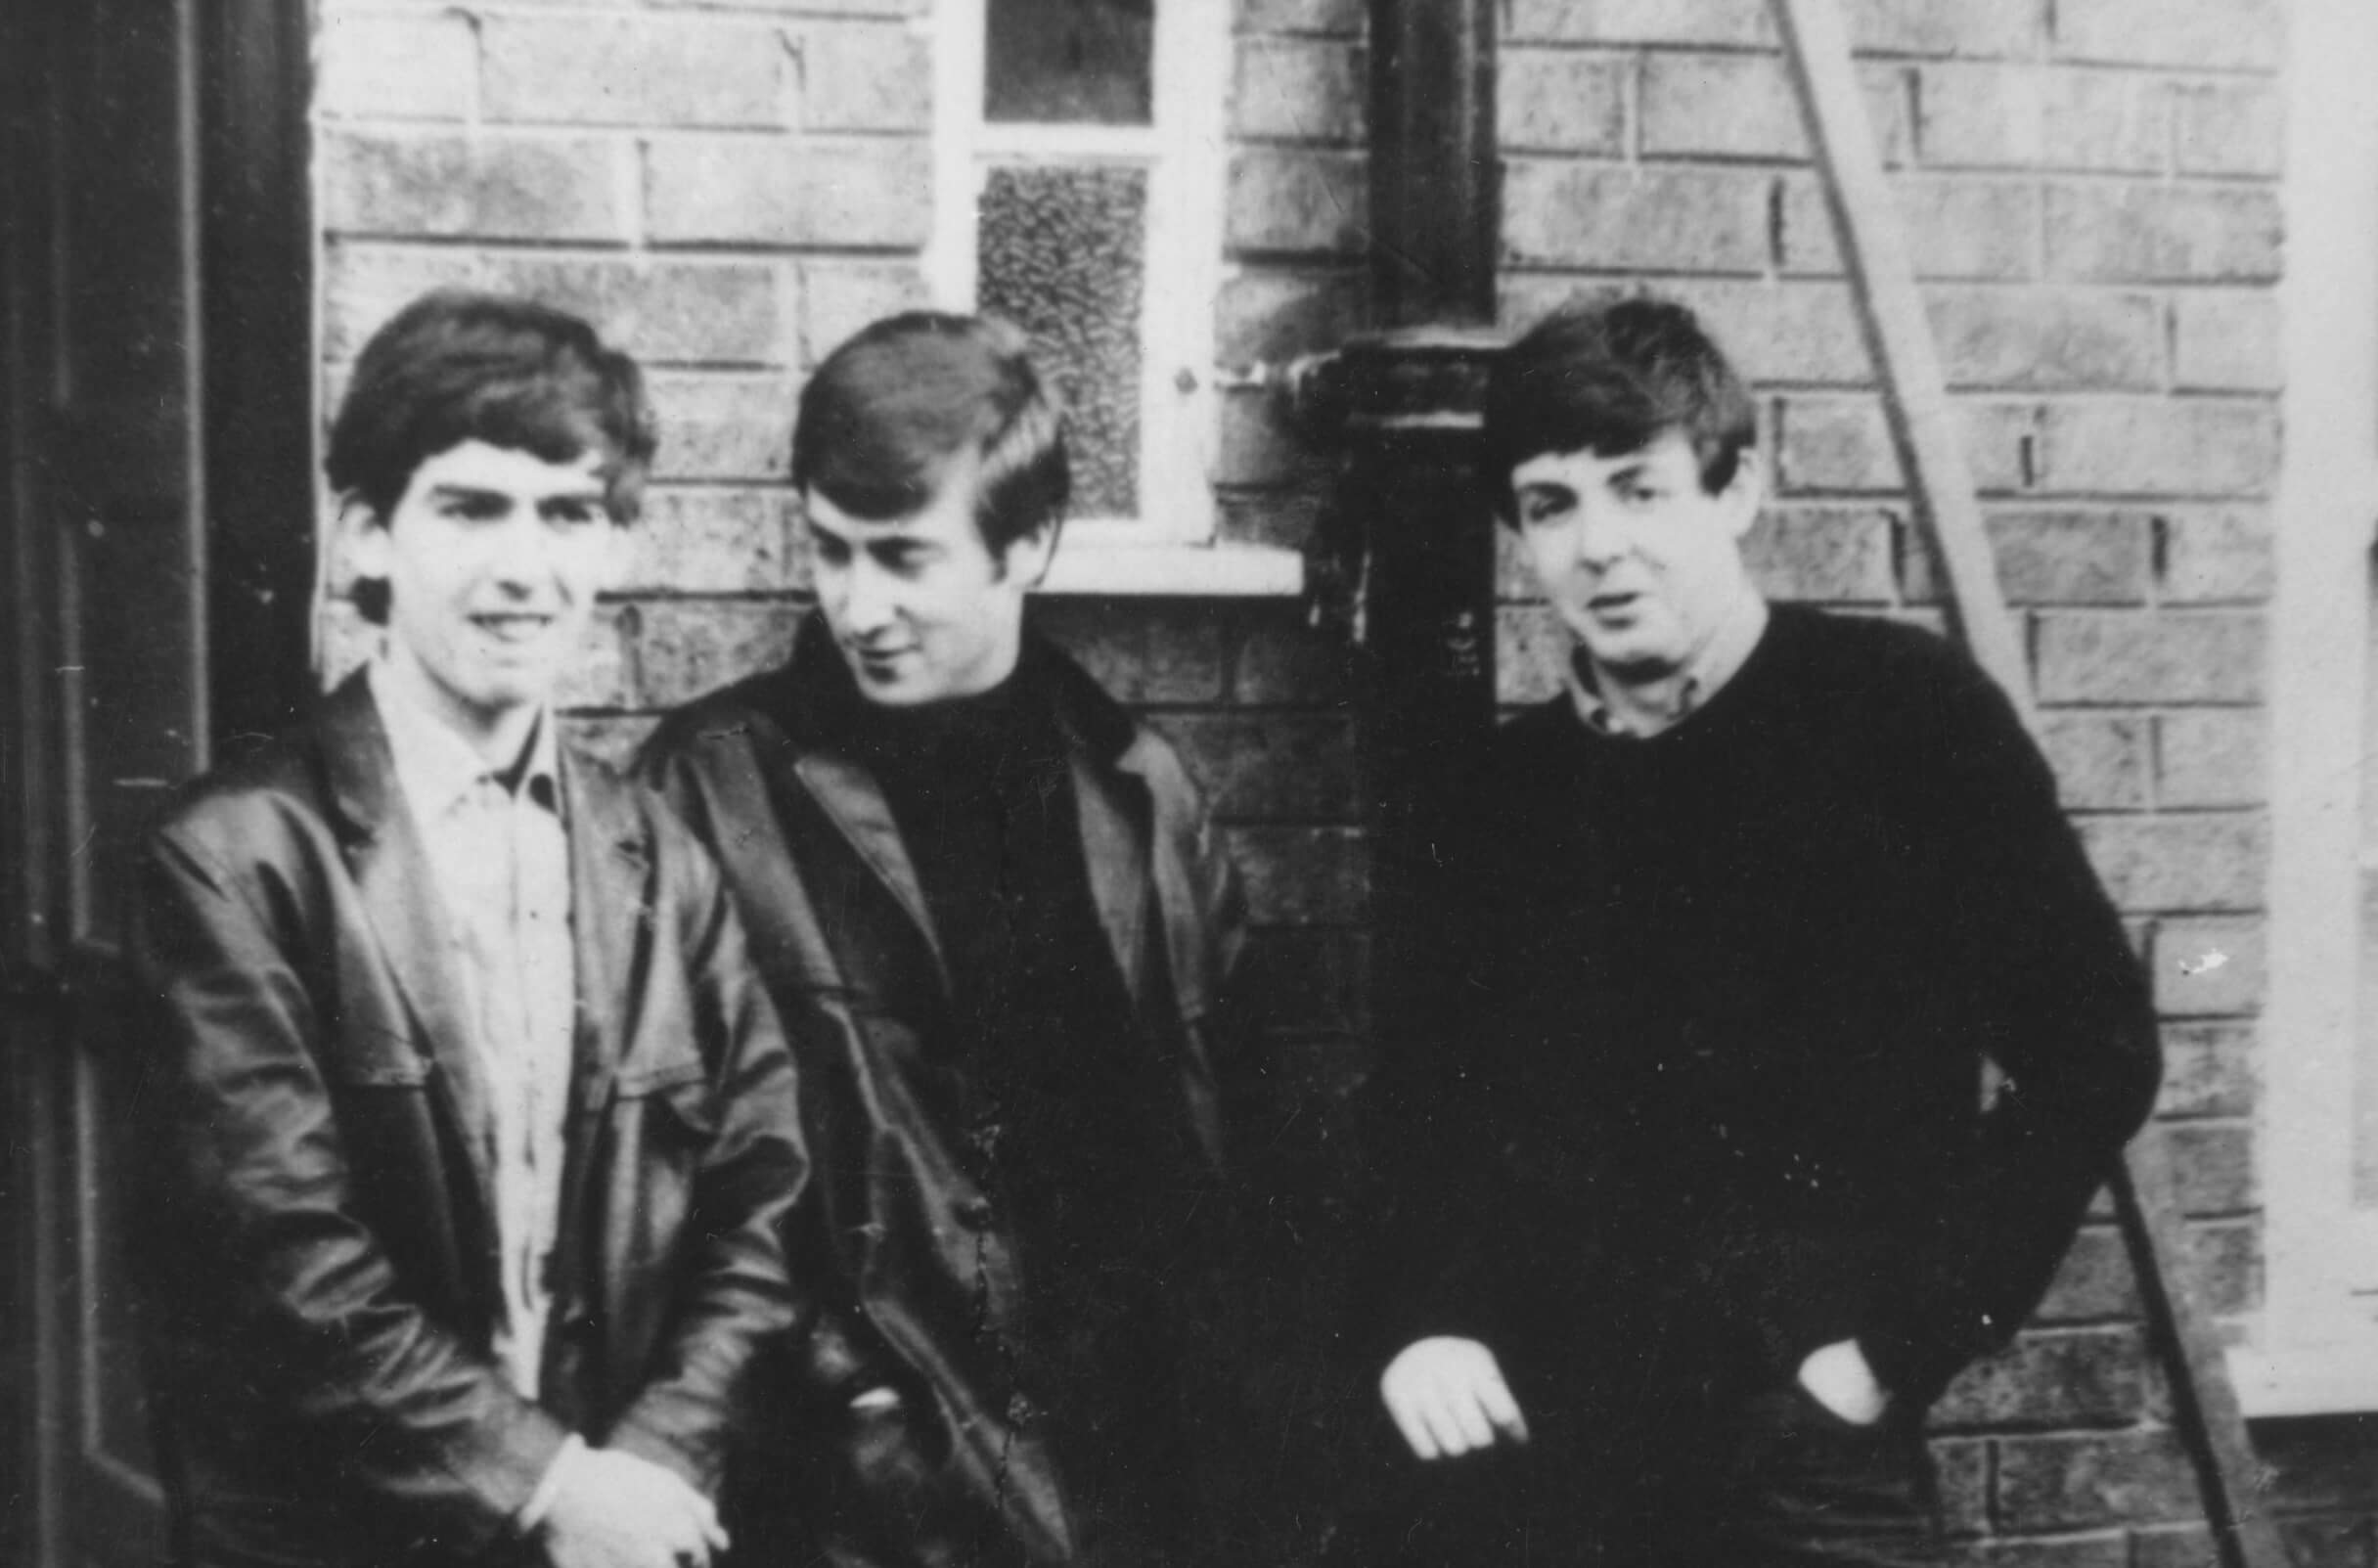 A black and white picture of George Harrison, John Lennon, and Paul McCartney leaning against a brick wall.